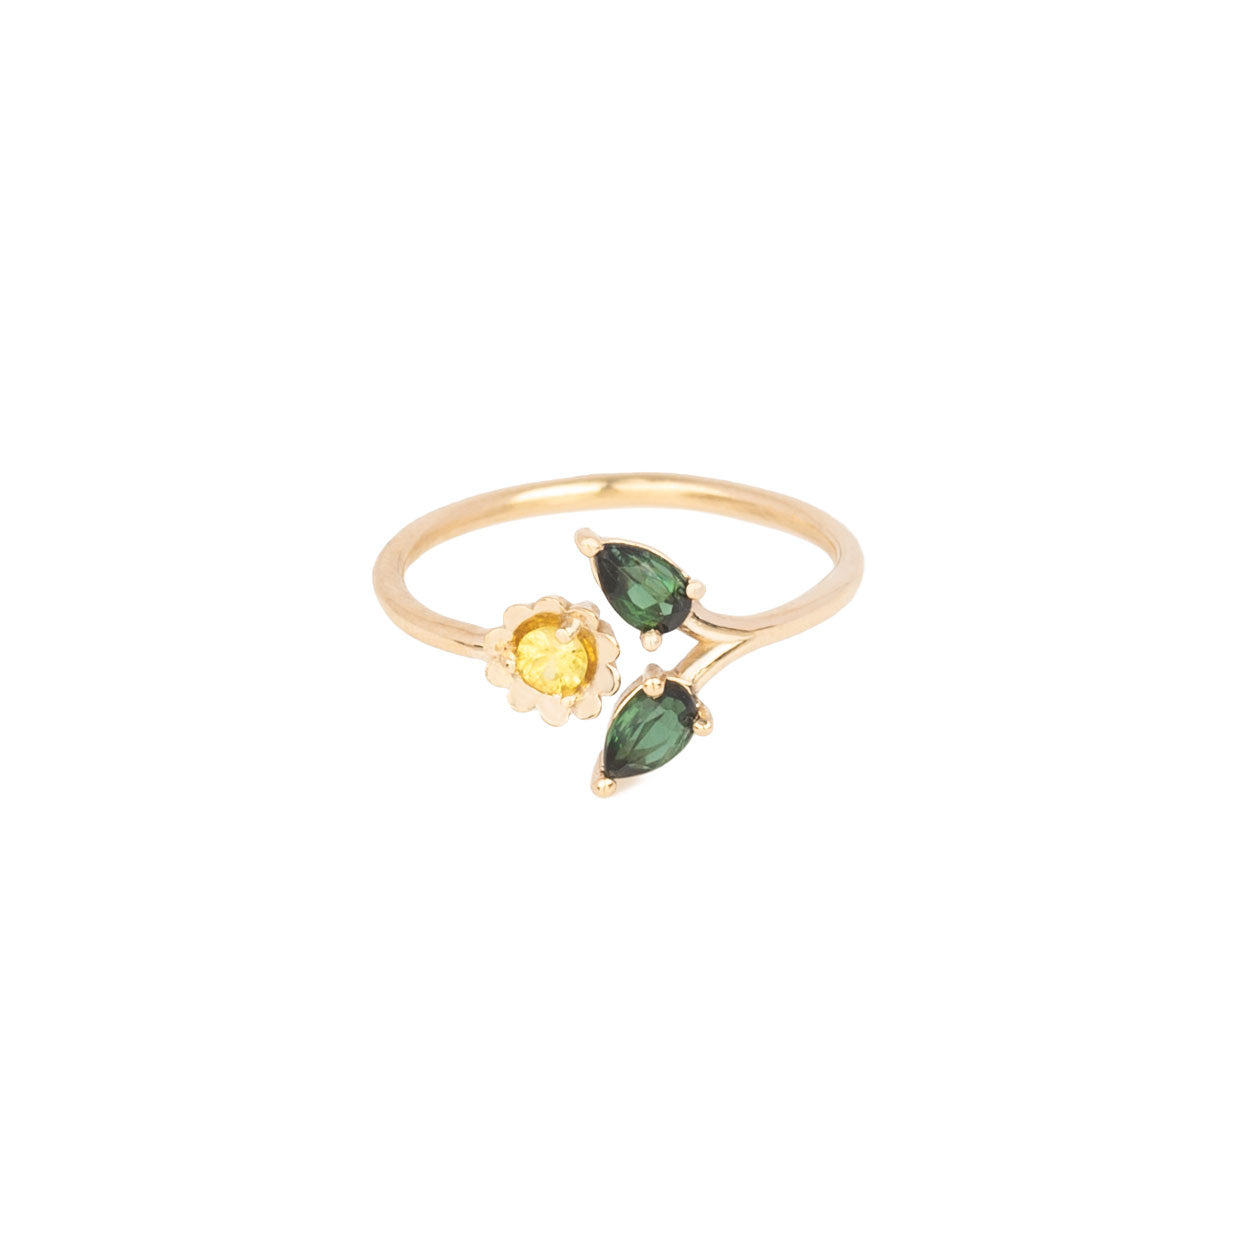 cute daisy ring in 14k yellow gold with green tourmalines and yellow sapphire